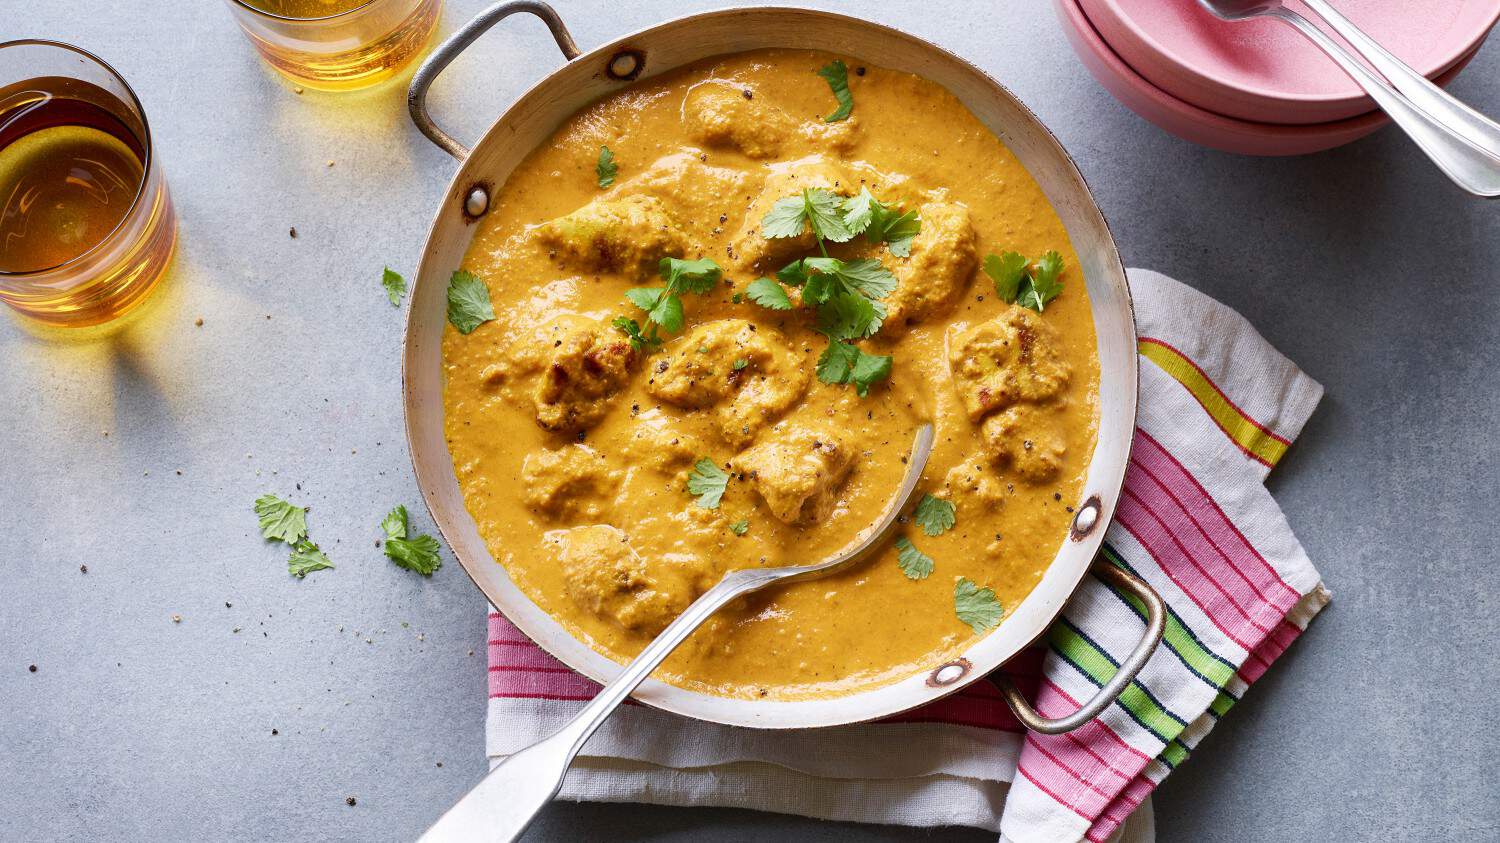 Which Ingredients Are Required To Make Chicken Korma? Which Steps To Follow?